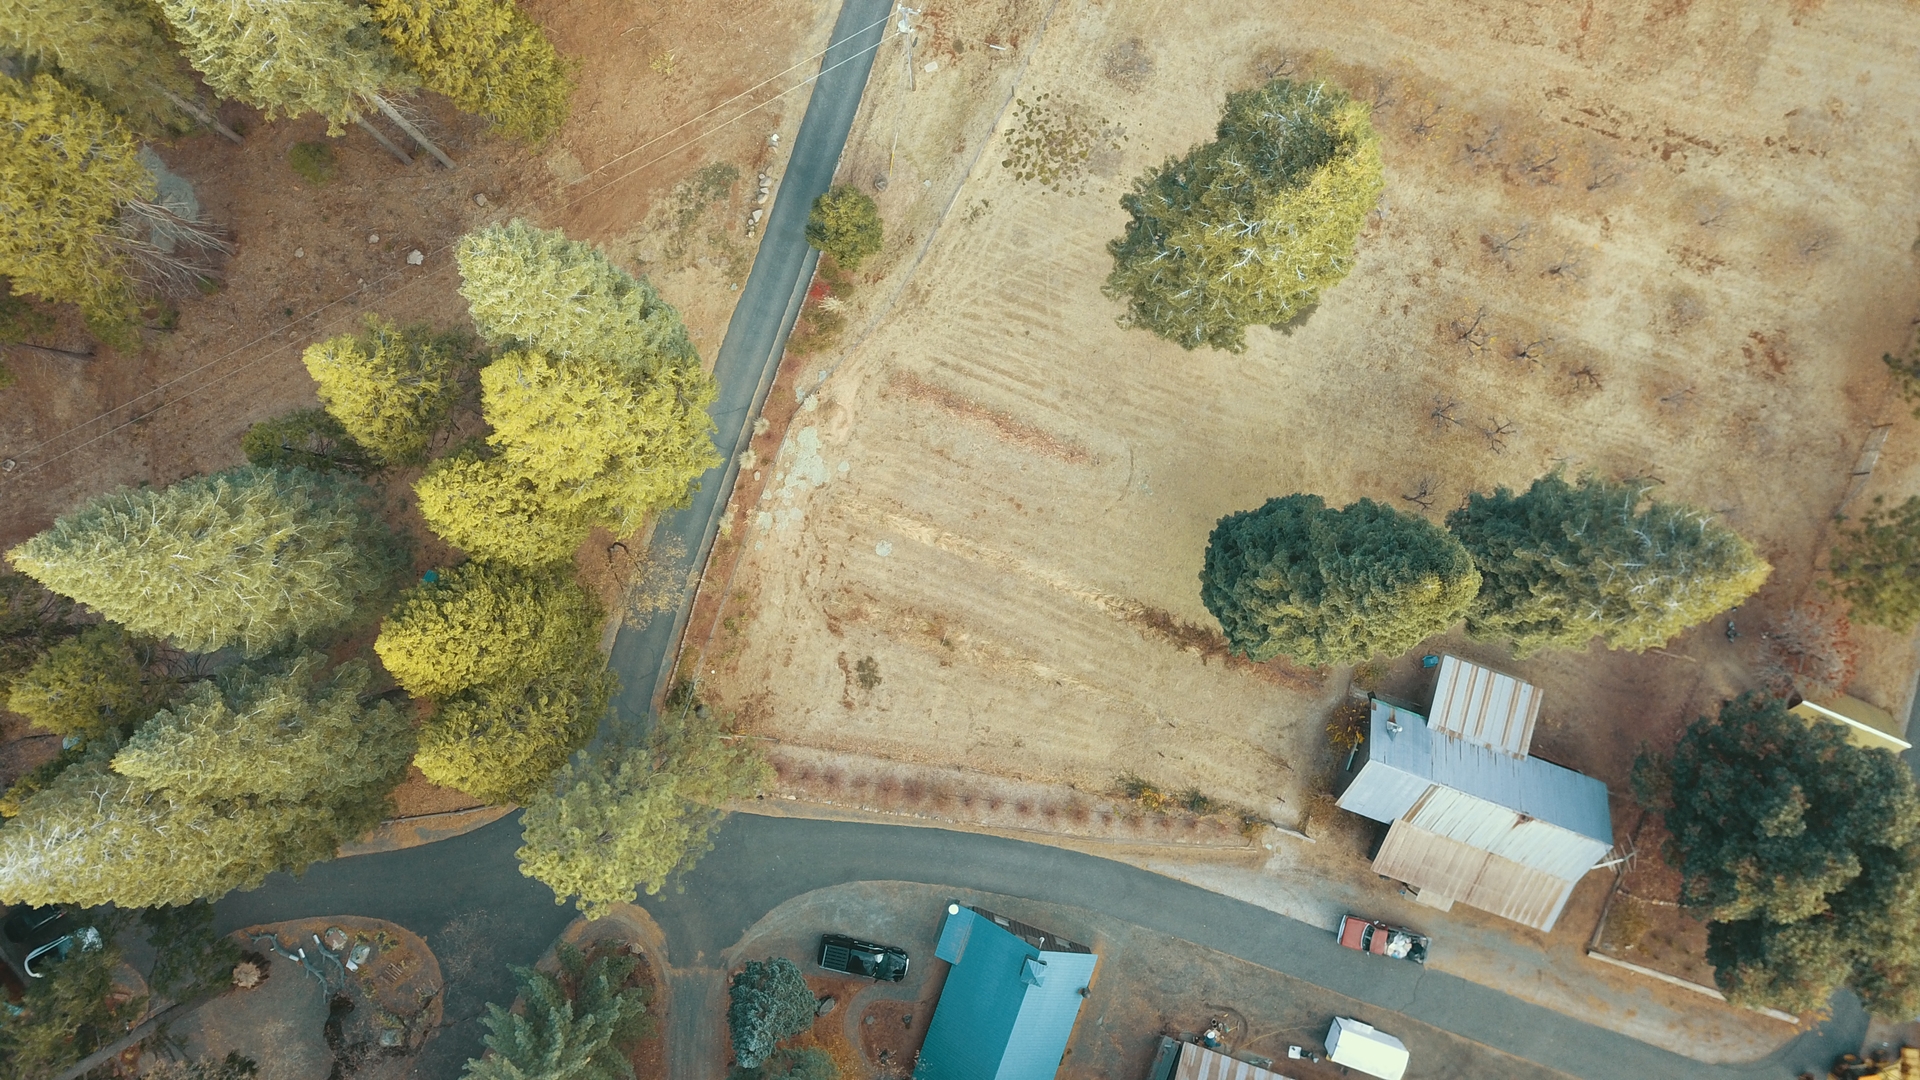 Making an aerial photo mosaic with a DJI drone, OpenDroneMap and Drone Harmony